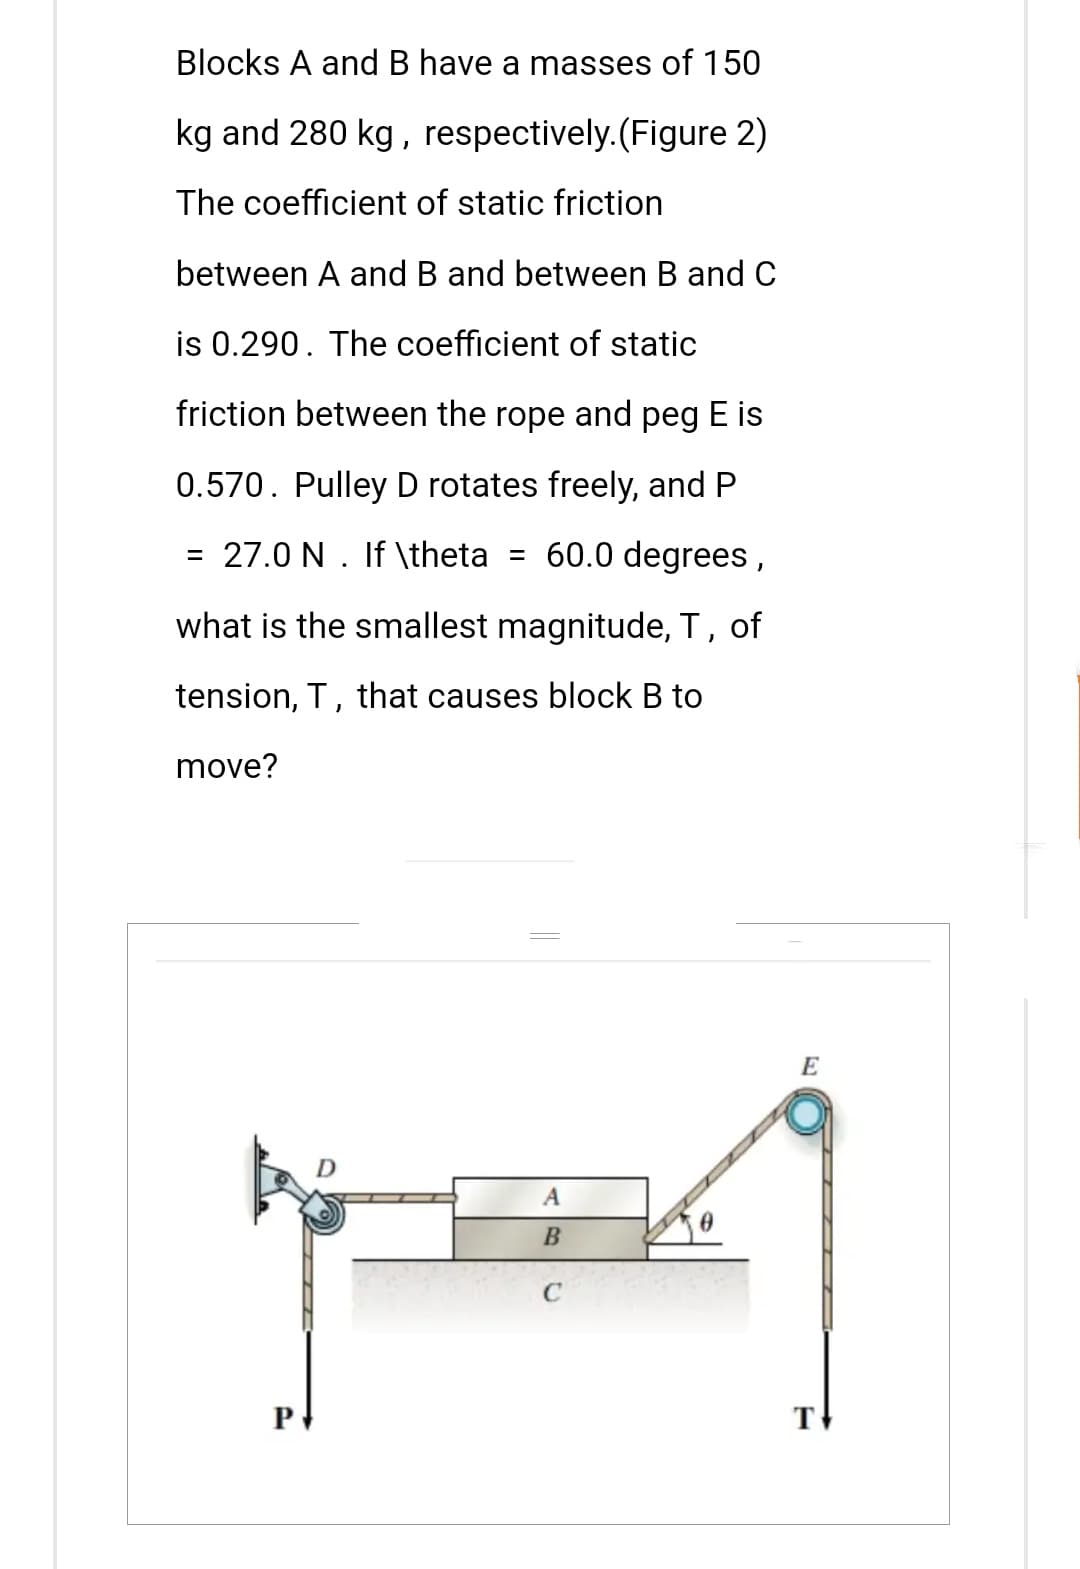 Blocks A and B have a masses of 150
kg and 280 kg, respectively. (Figure 2)
The coefficient of static friction
between A and B and between B and C
is 0.290. The coefficient of static
friction between the rope and peg E is
0.570. Pulley D rotates freely, and P
= 27.0 N. If \theta = 60.0 degrees,
what is the smallest magnitude, T, of
tension, T, that causes block B to
move?
P
A
B
E
T